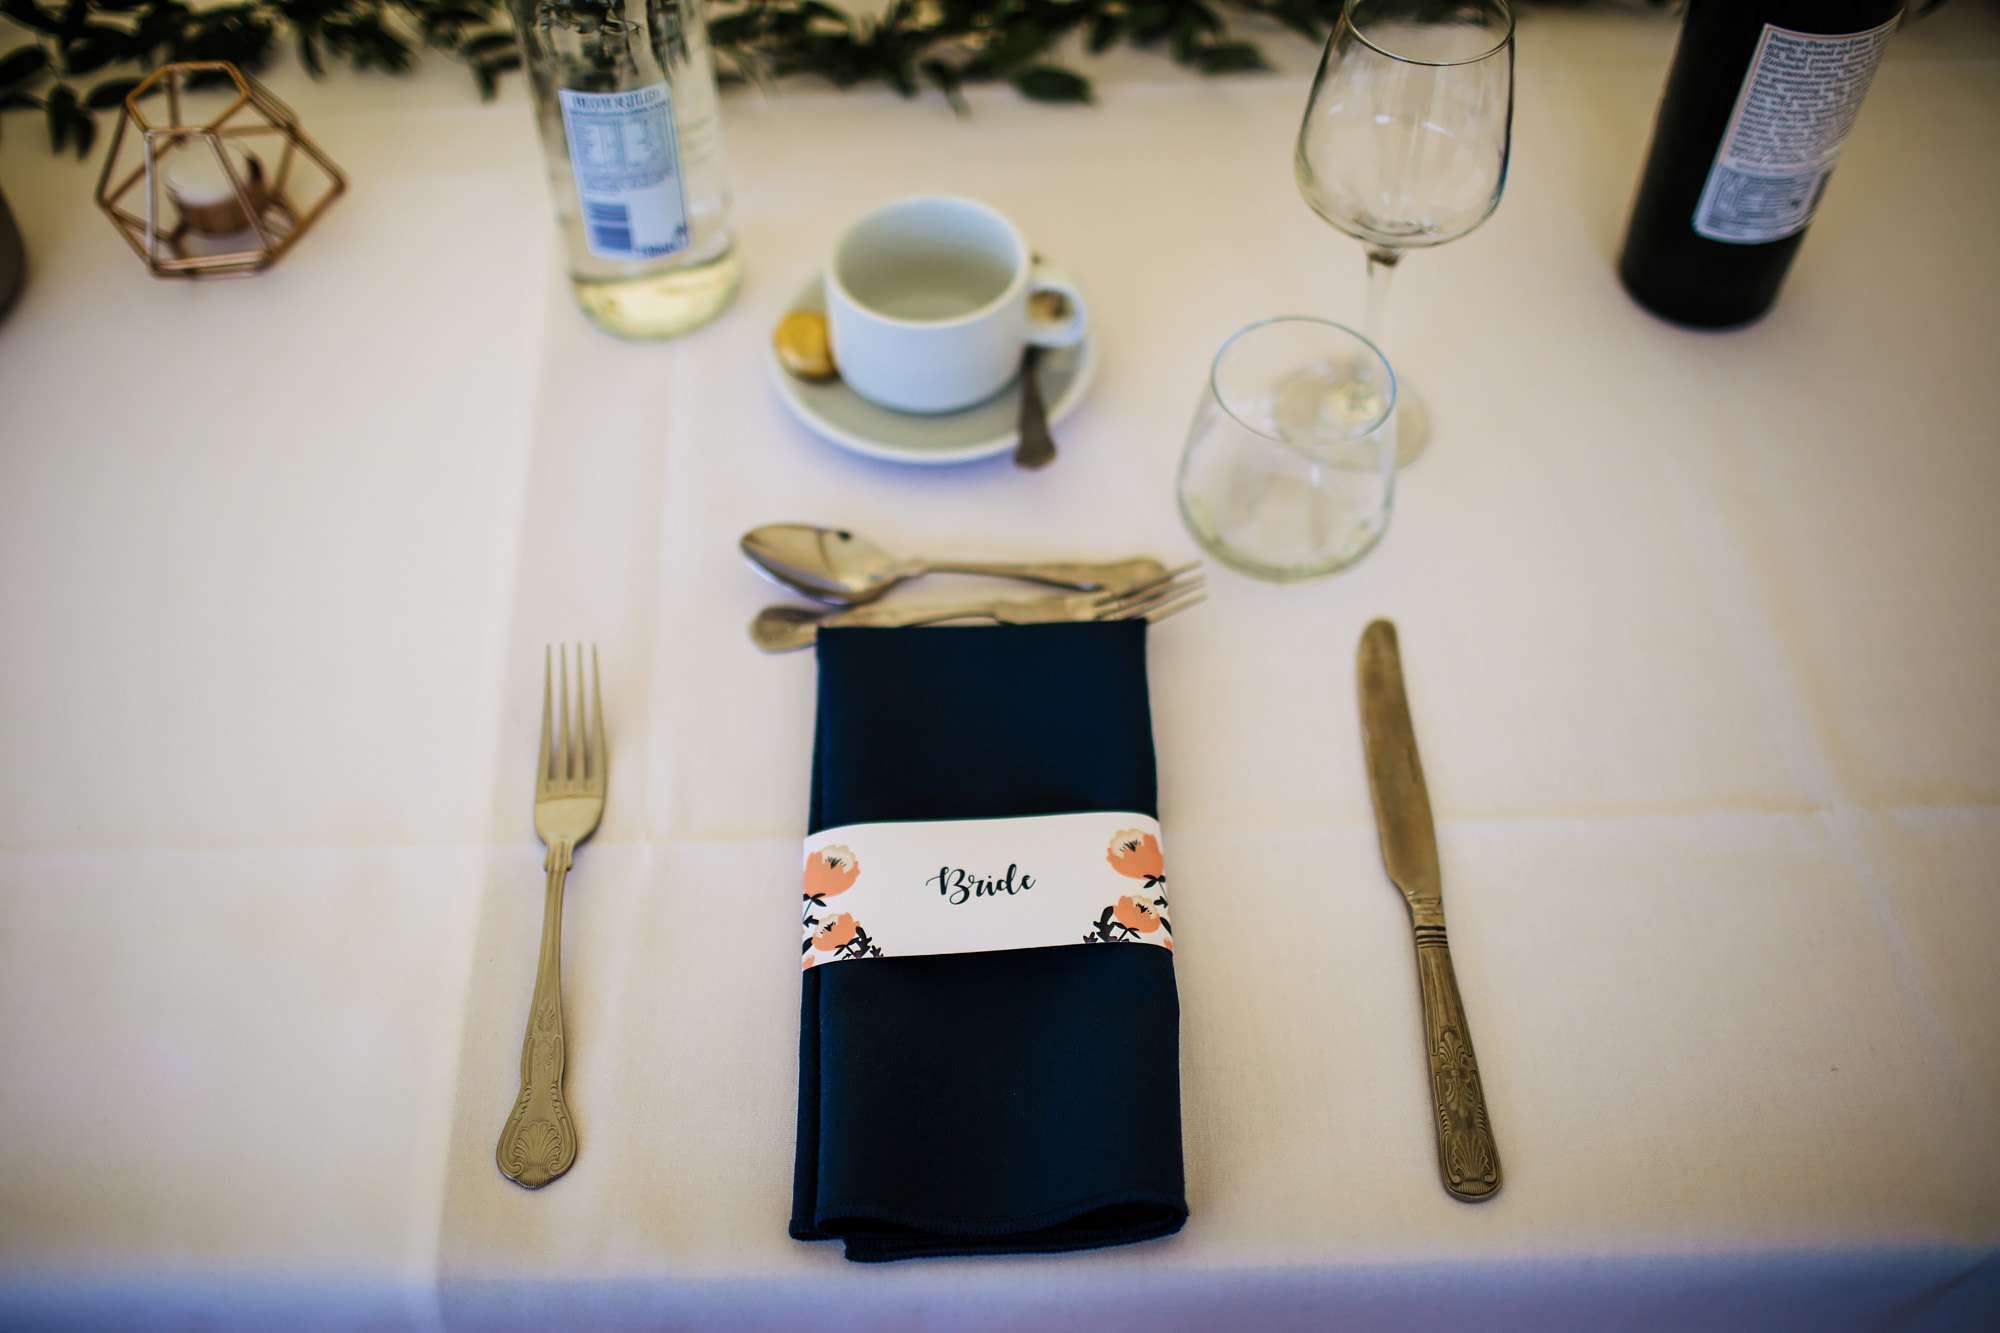 Bride's table setting at her wedding in Huddersfield